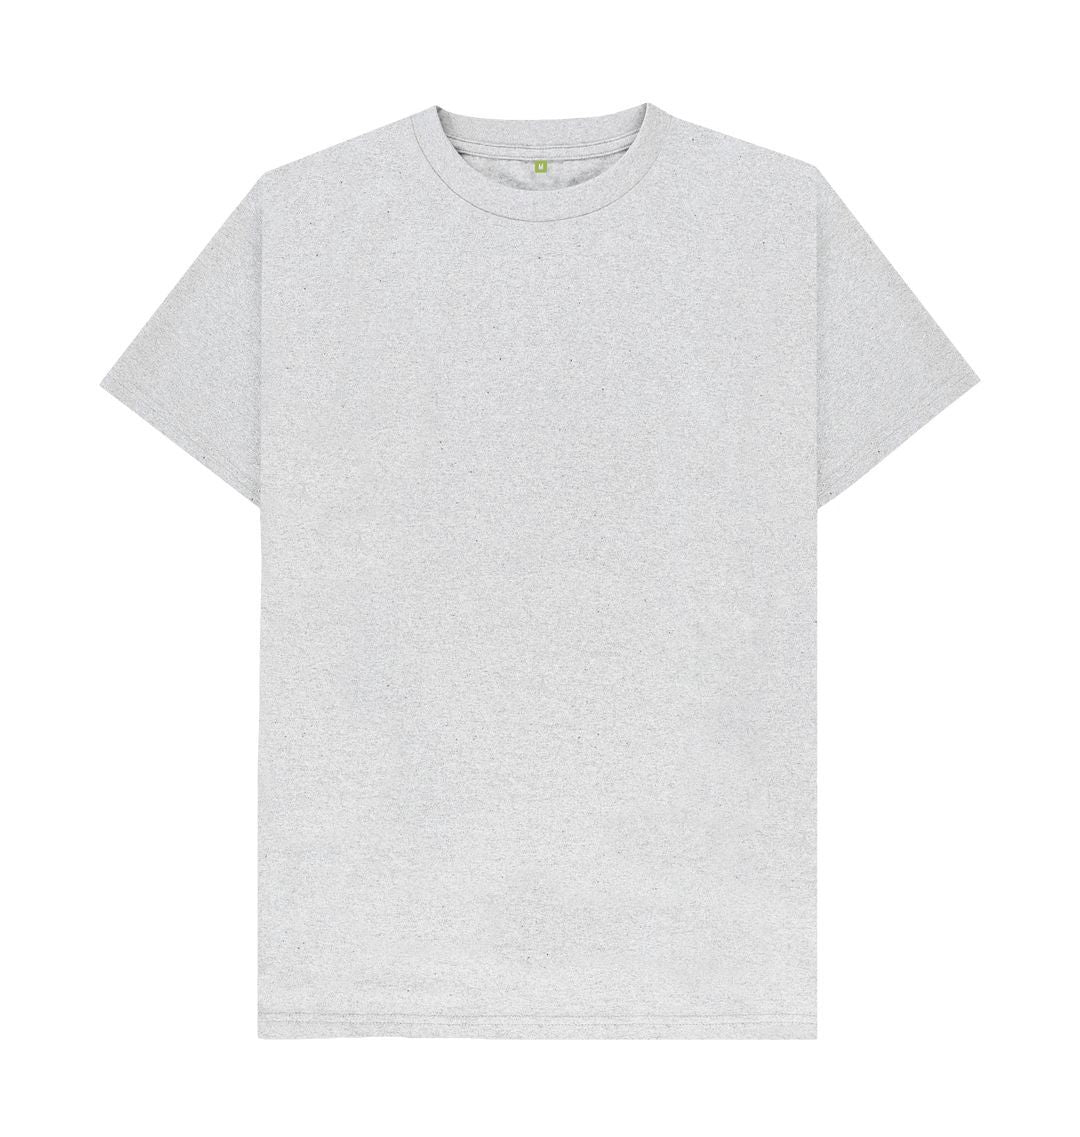 Grey Men's sustainable essential t-shirt